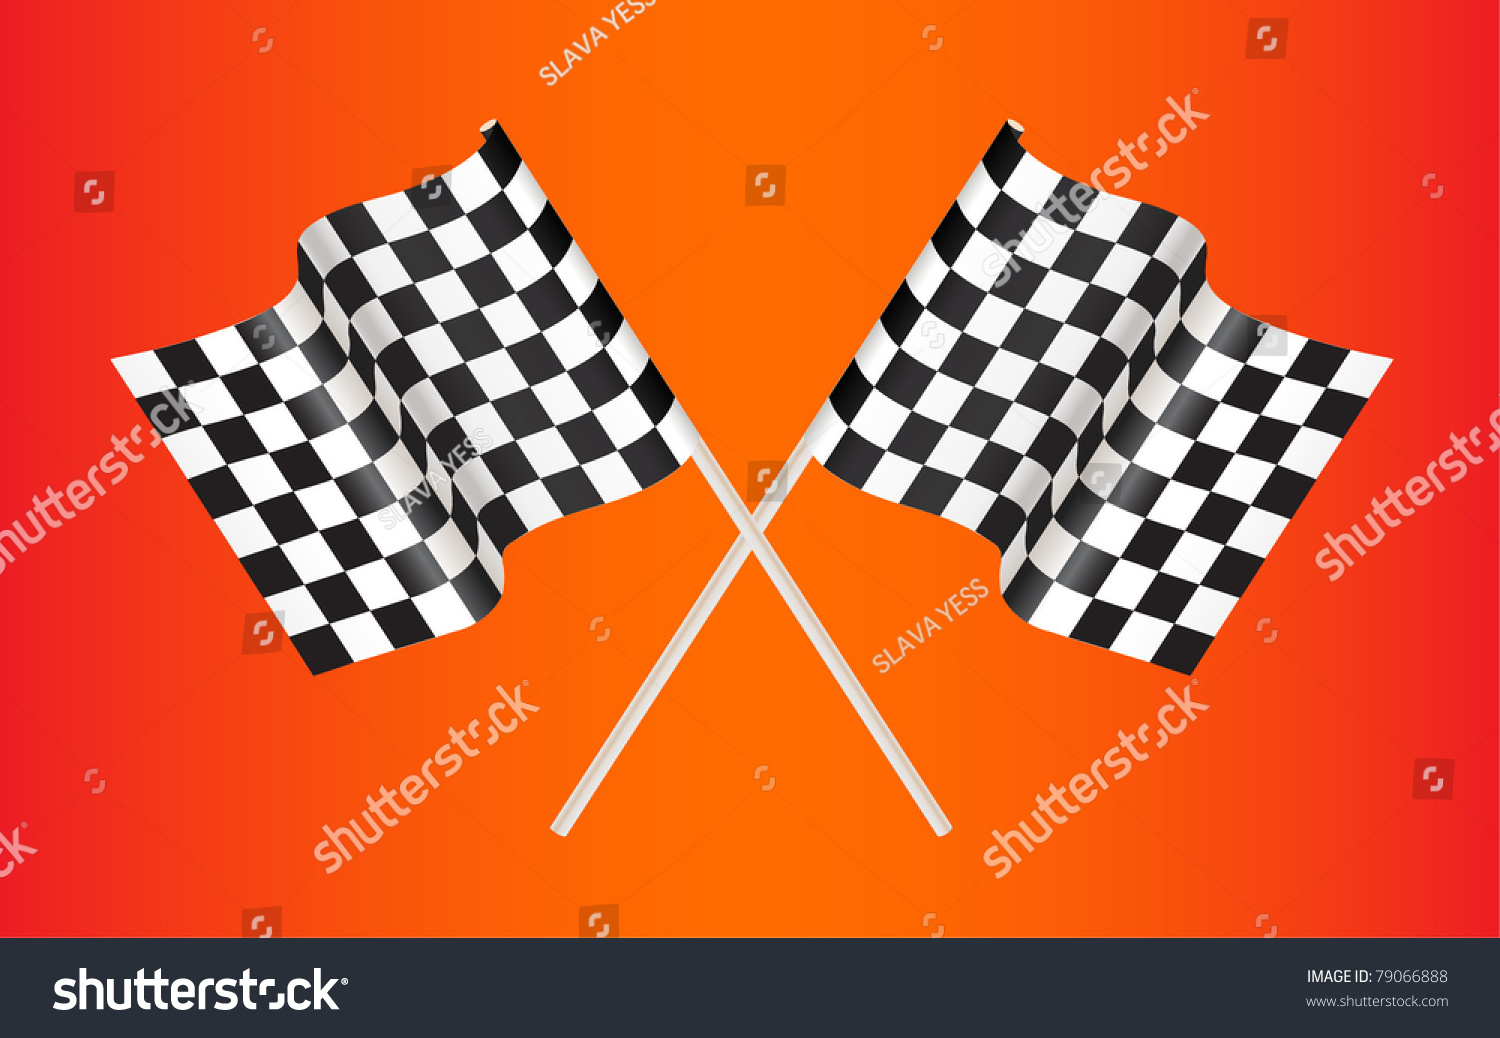 checkered-racing-flag-on-red-background-stock-vector-royalty-free